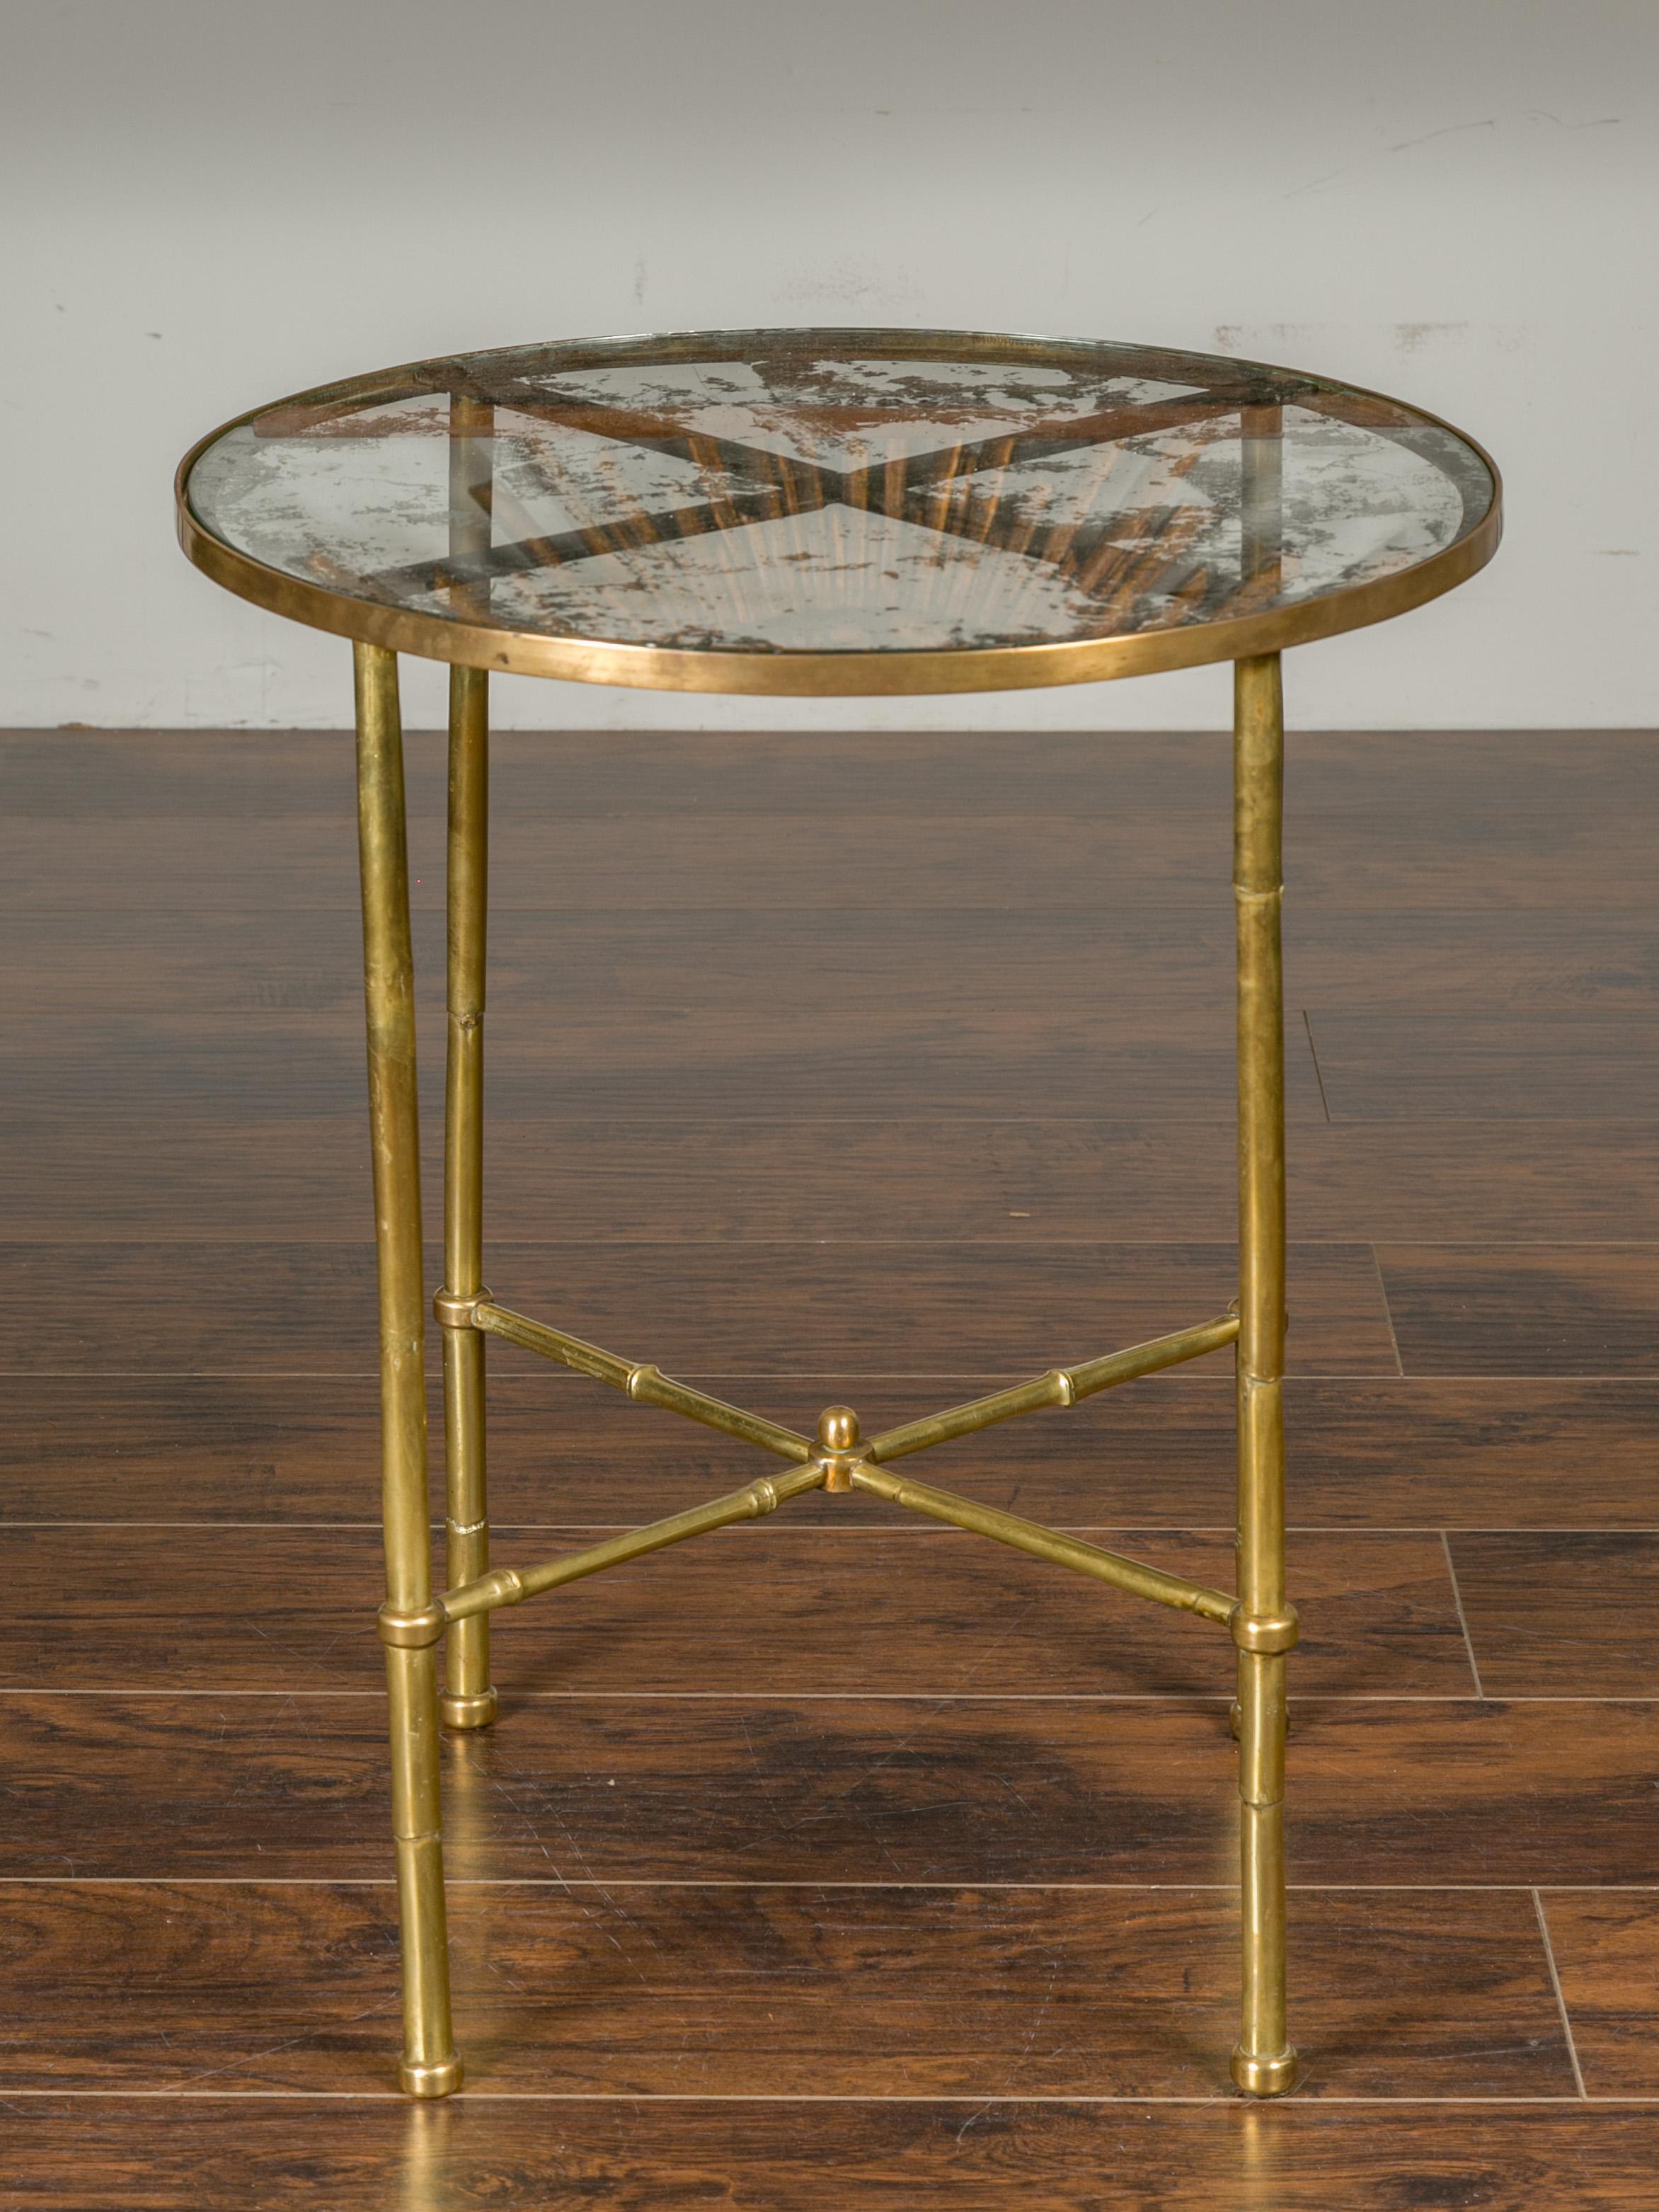 Italian Midcentury Brass Bamboo-Inspired Side Table with Distressed Glass Top For Sale 5